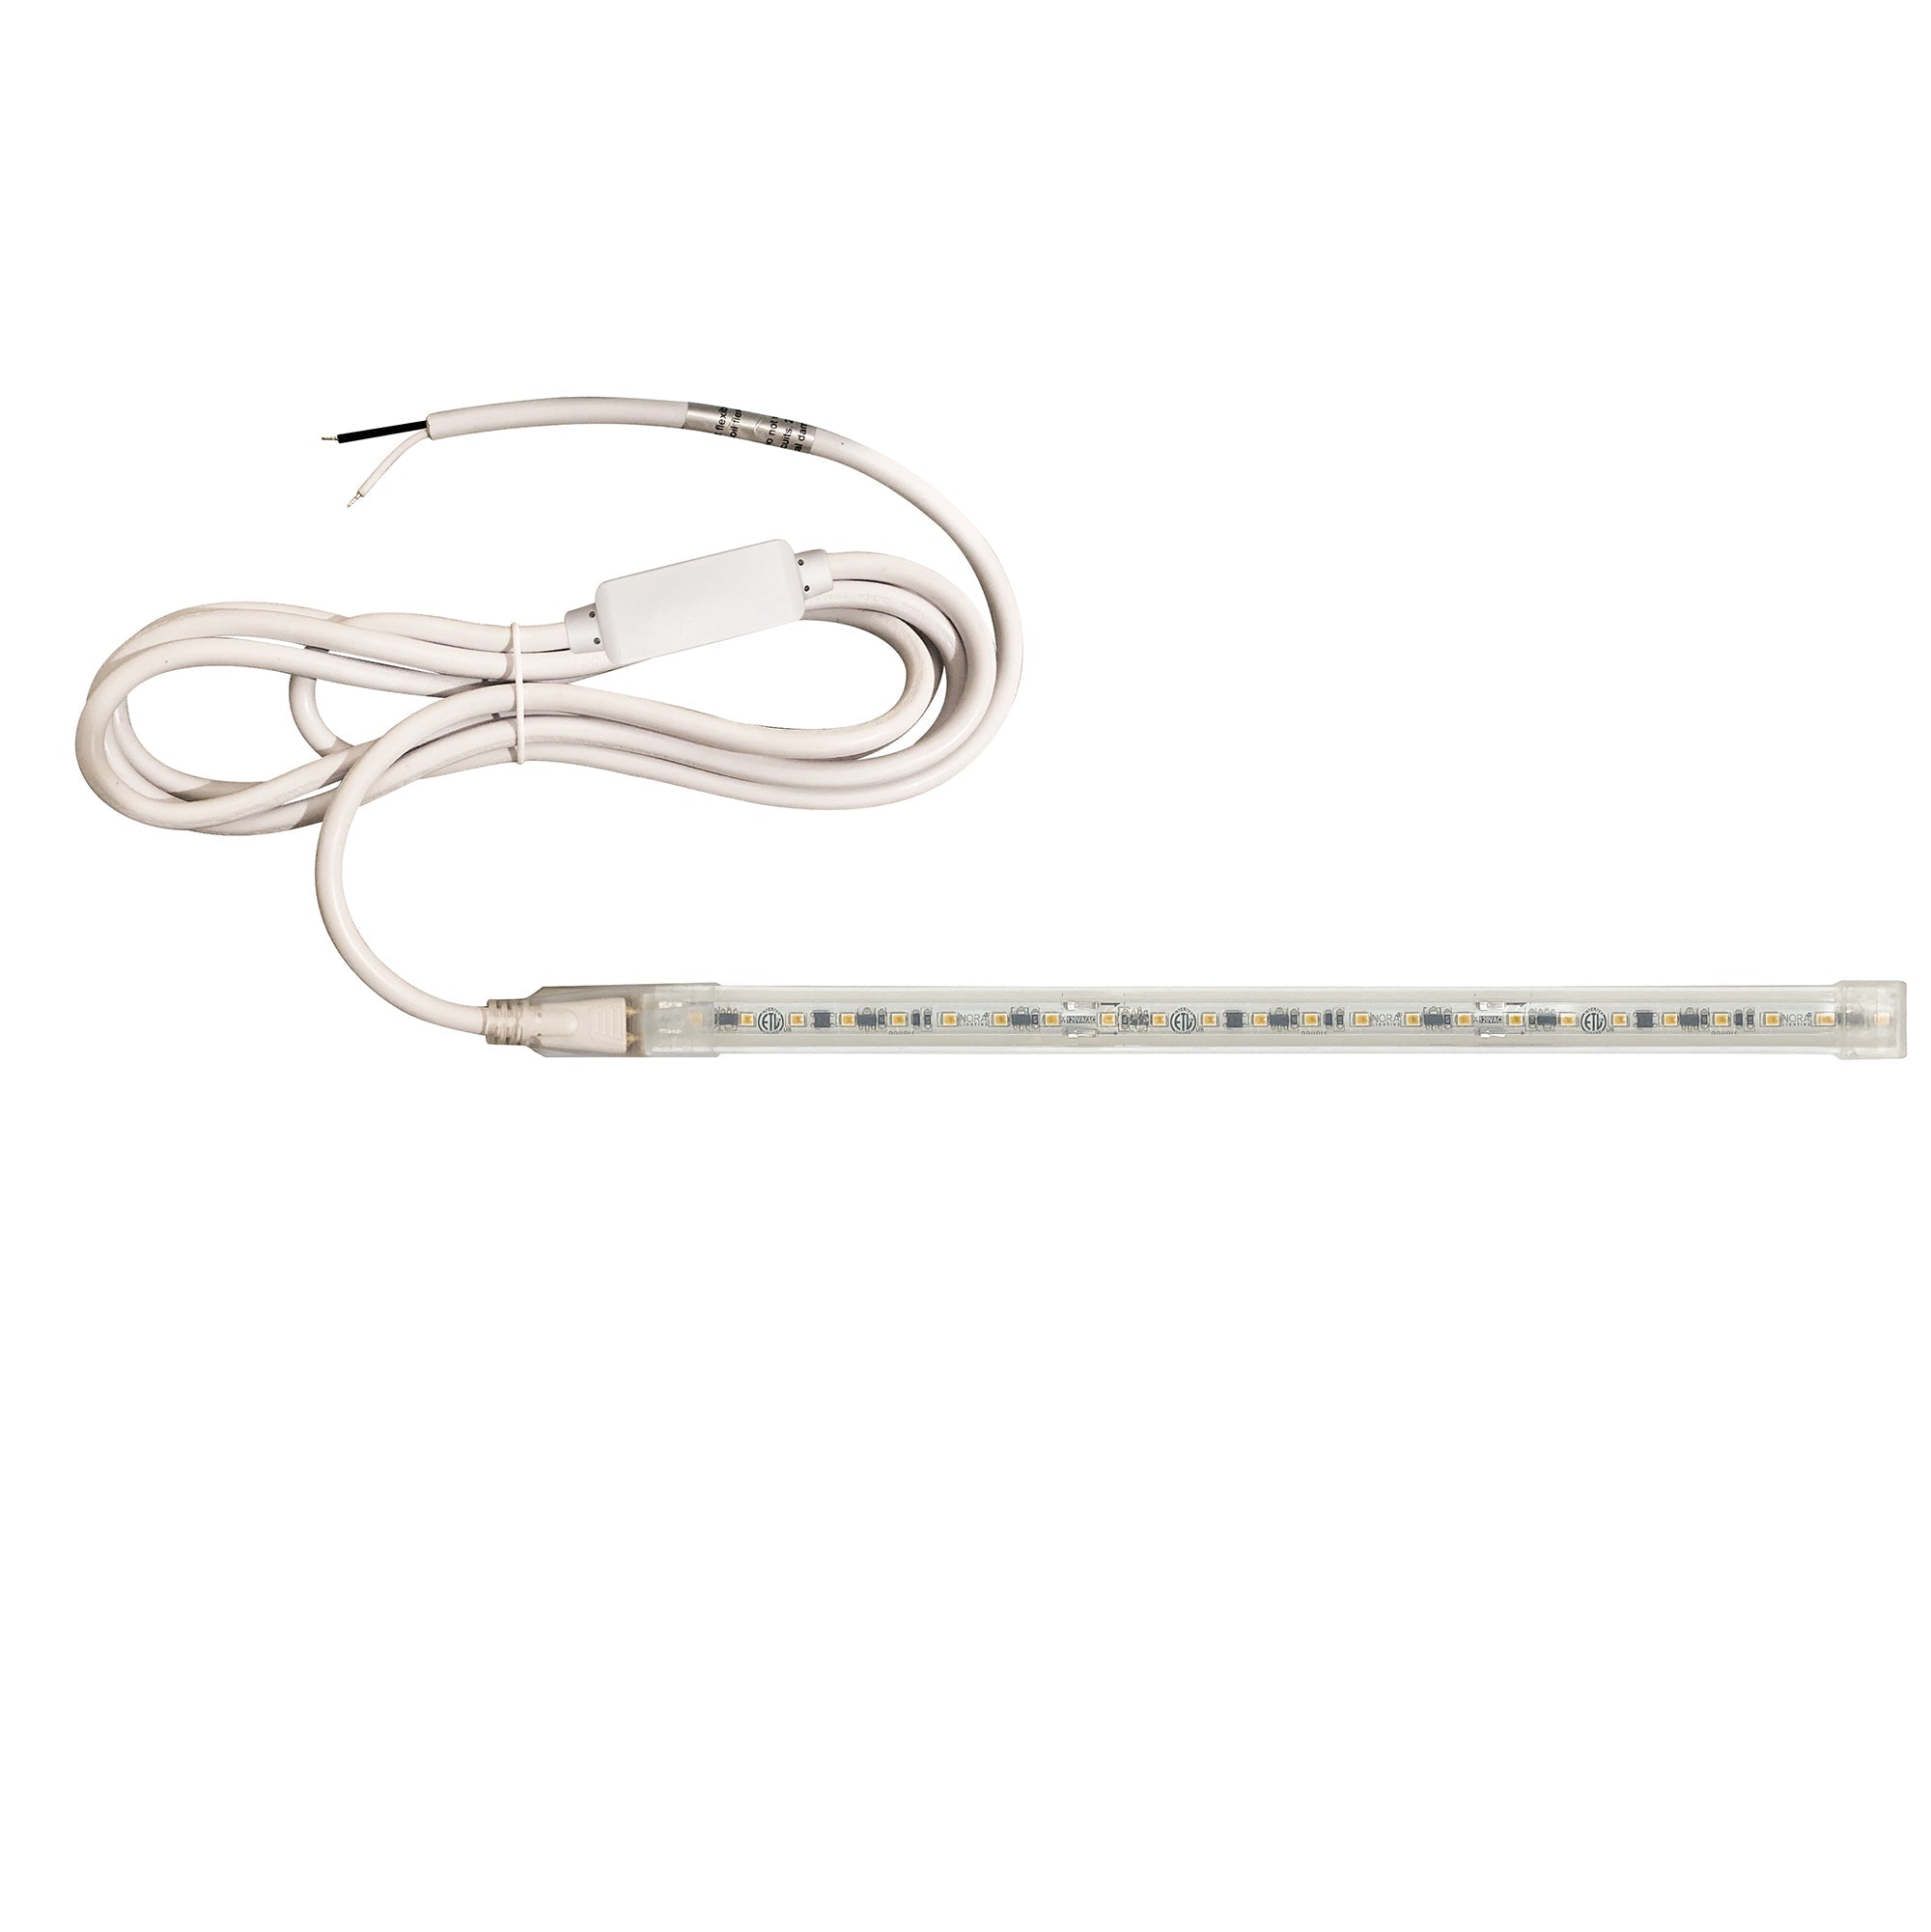 Nora Lighting NUTP13-W81-12-930/HWSP - Accent / Undercabinet - Custom Cut 81-ft 120V Continuous LED Tape Light, 330lm / 3.6W per foot, 3000K, w/ Mounting Clips and 8' Hardwired Power Cord w/ Surge Protector